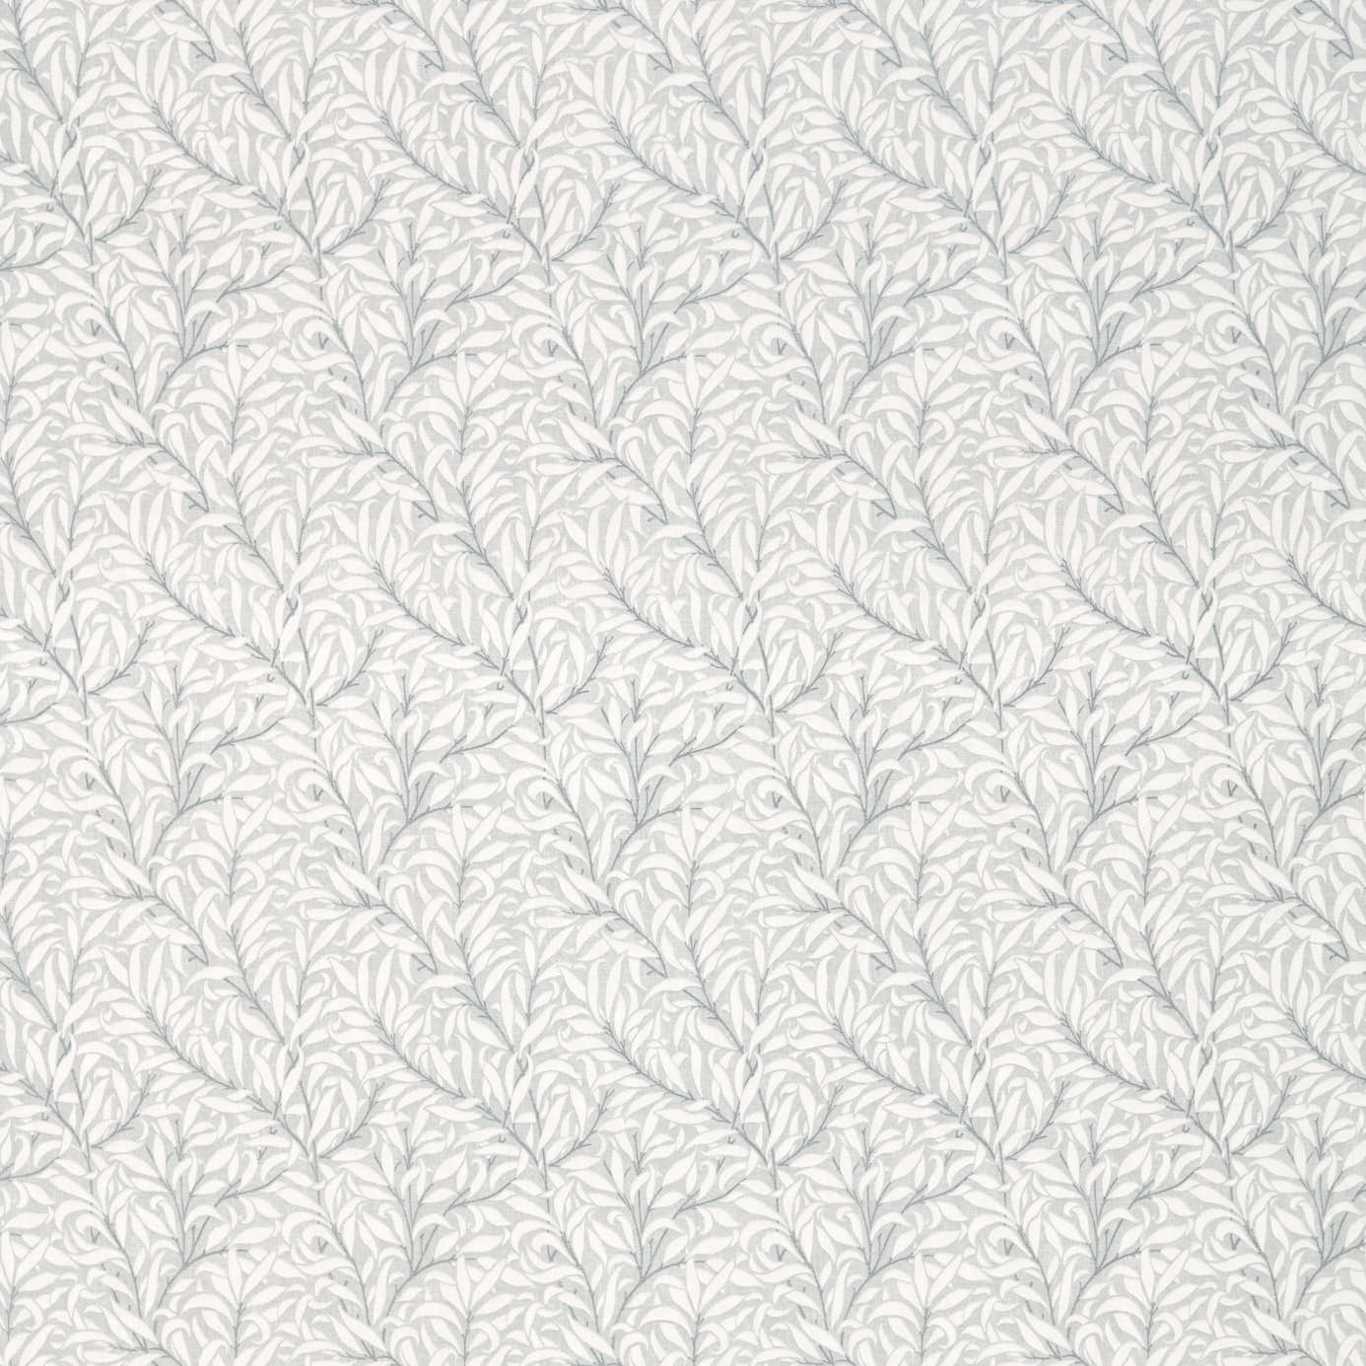 Pure Willow Boughs Print Fabric by Morris & Co.